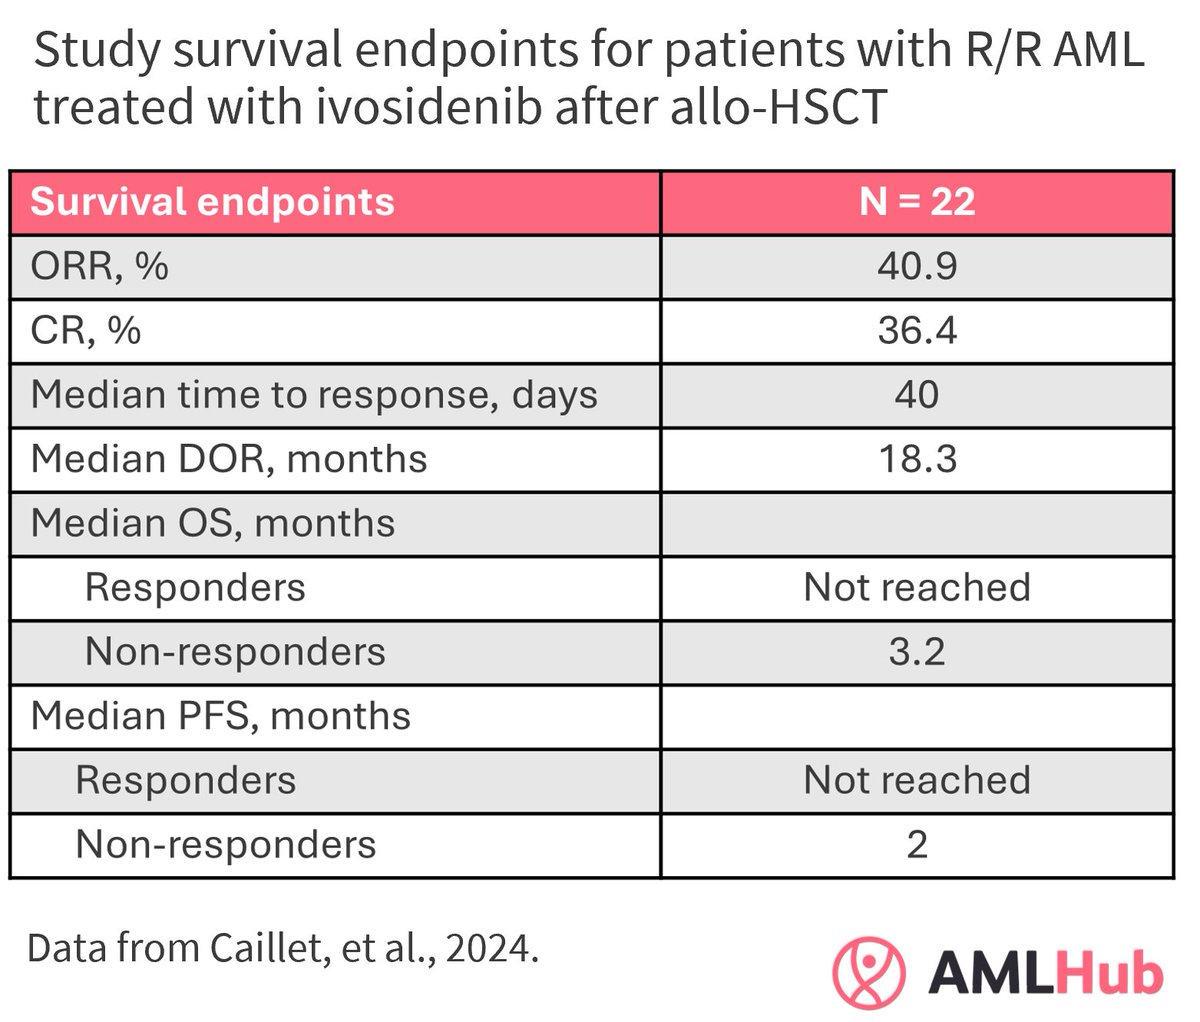 Can ivosidenib be used as a single agent targeted therapy in patients with relapsed/refractory AML after allogeneic hematopoietic stem cell transplantation? Read our summary of a recent retrospective study to learn more: loom.ly/2AgOQJ0 #AMLsm #leusm #leukemia #MedEd